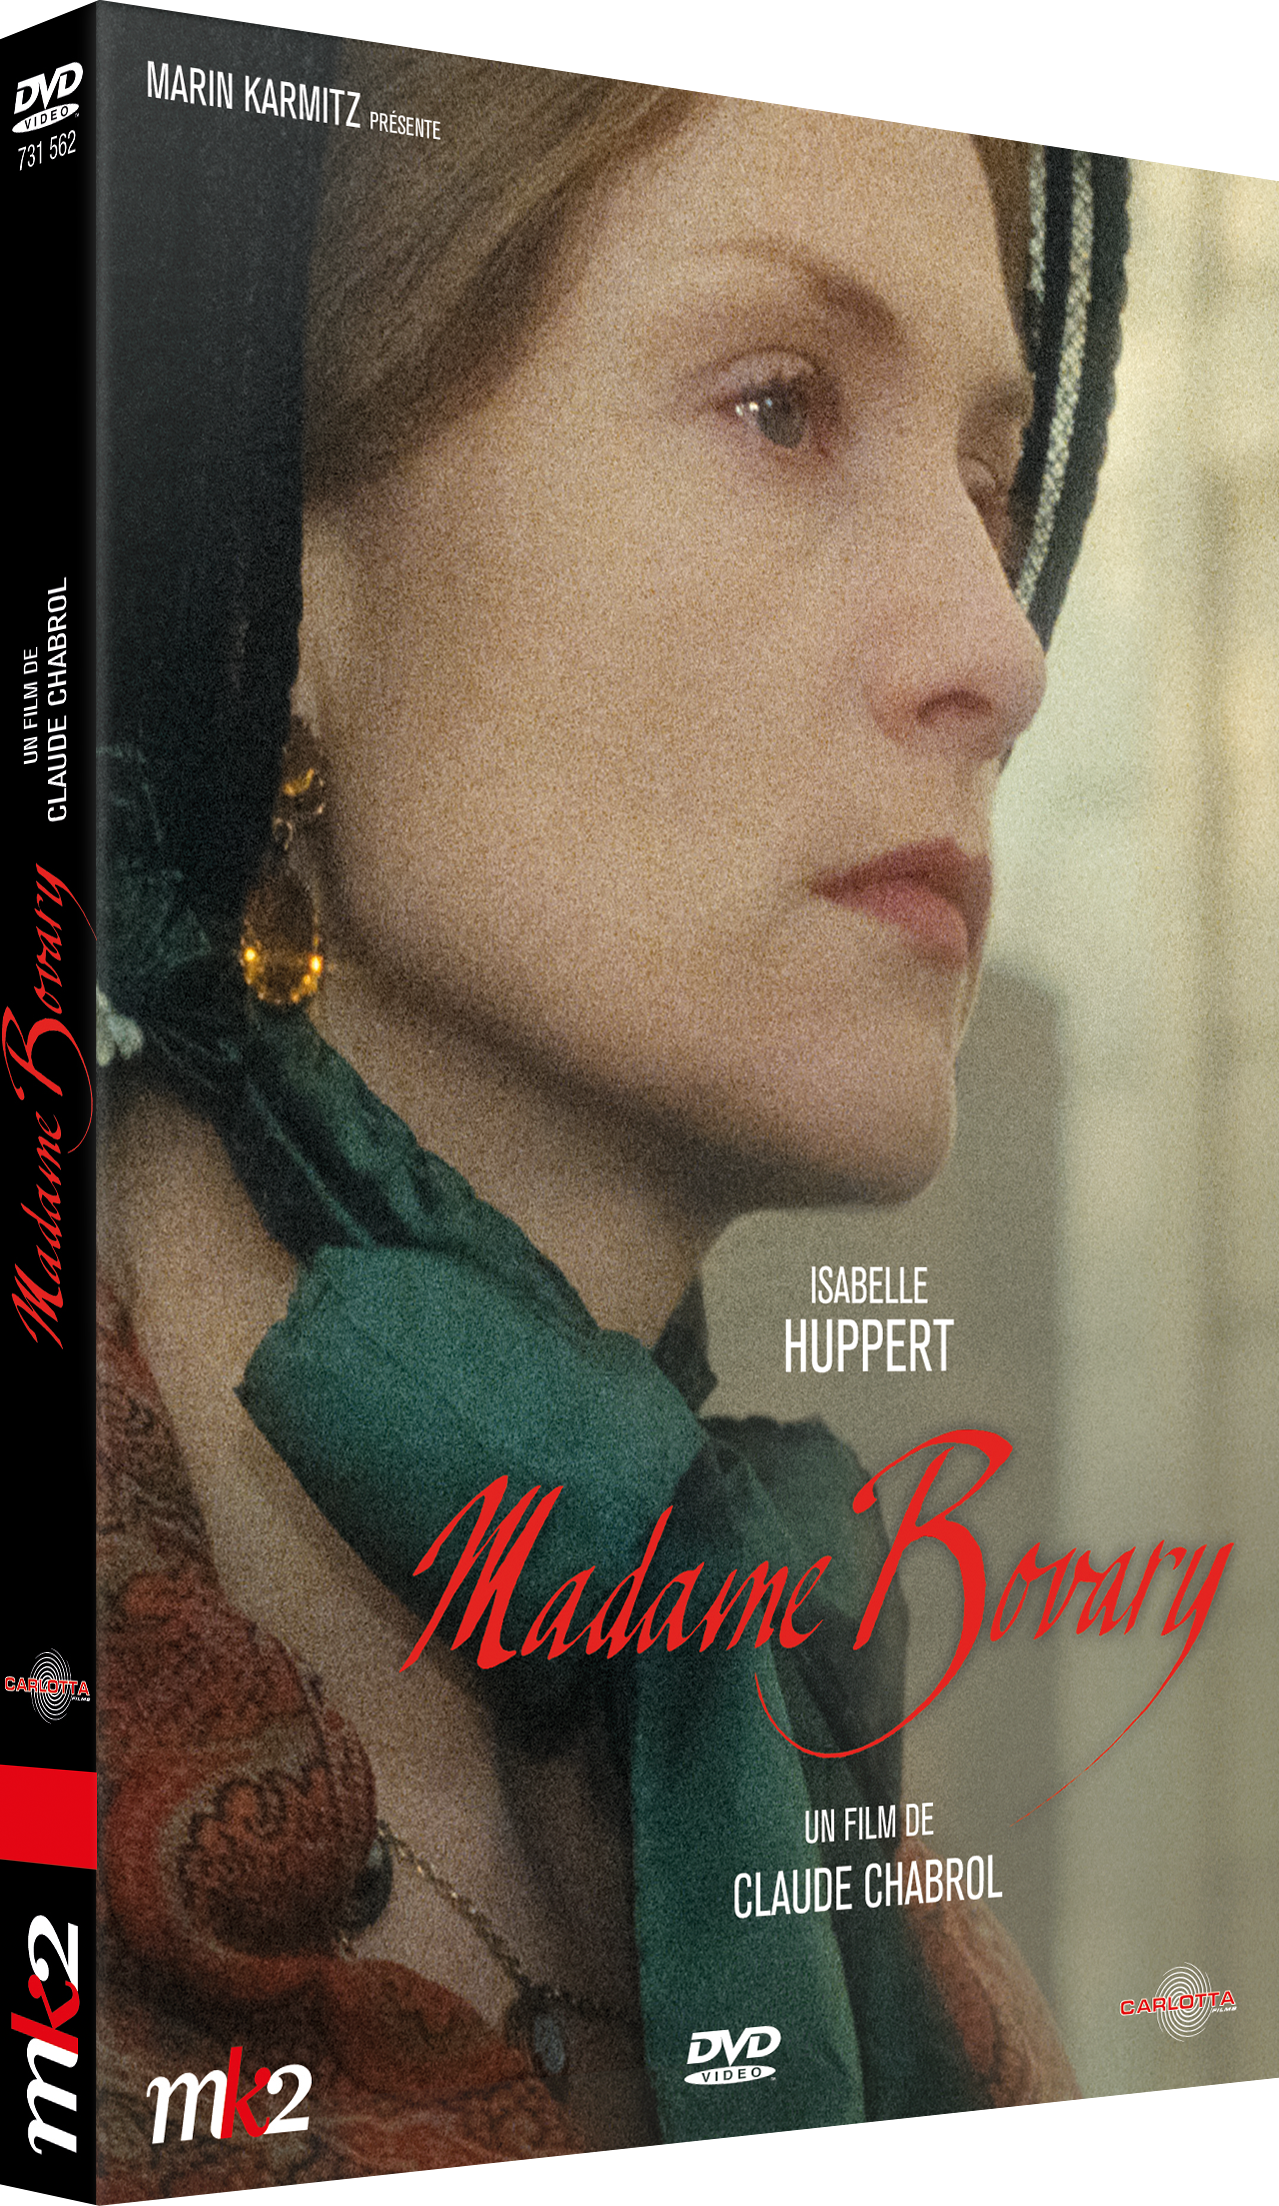 Madame Bovary by Claude Chabrol